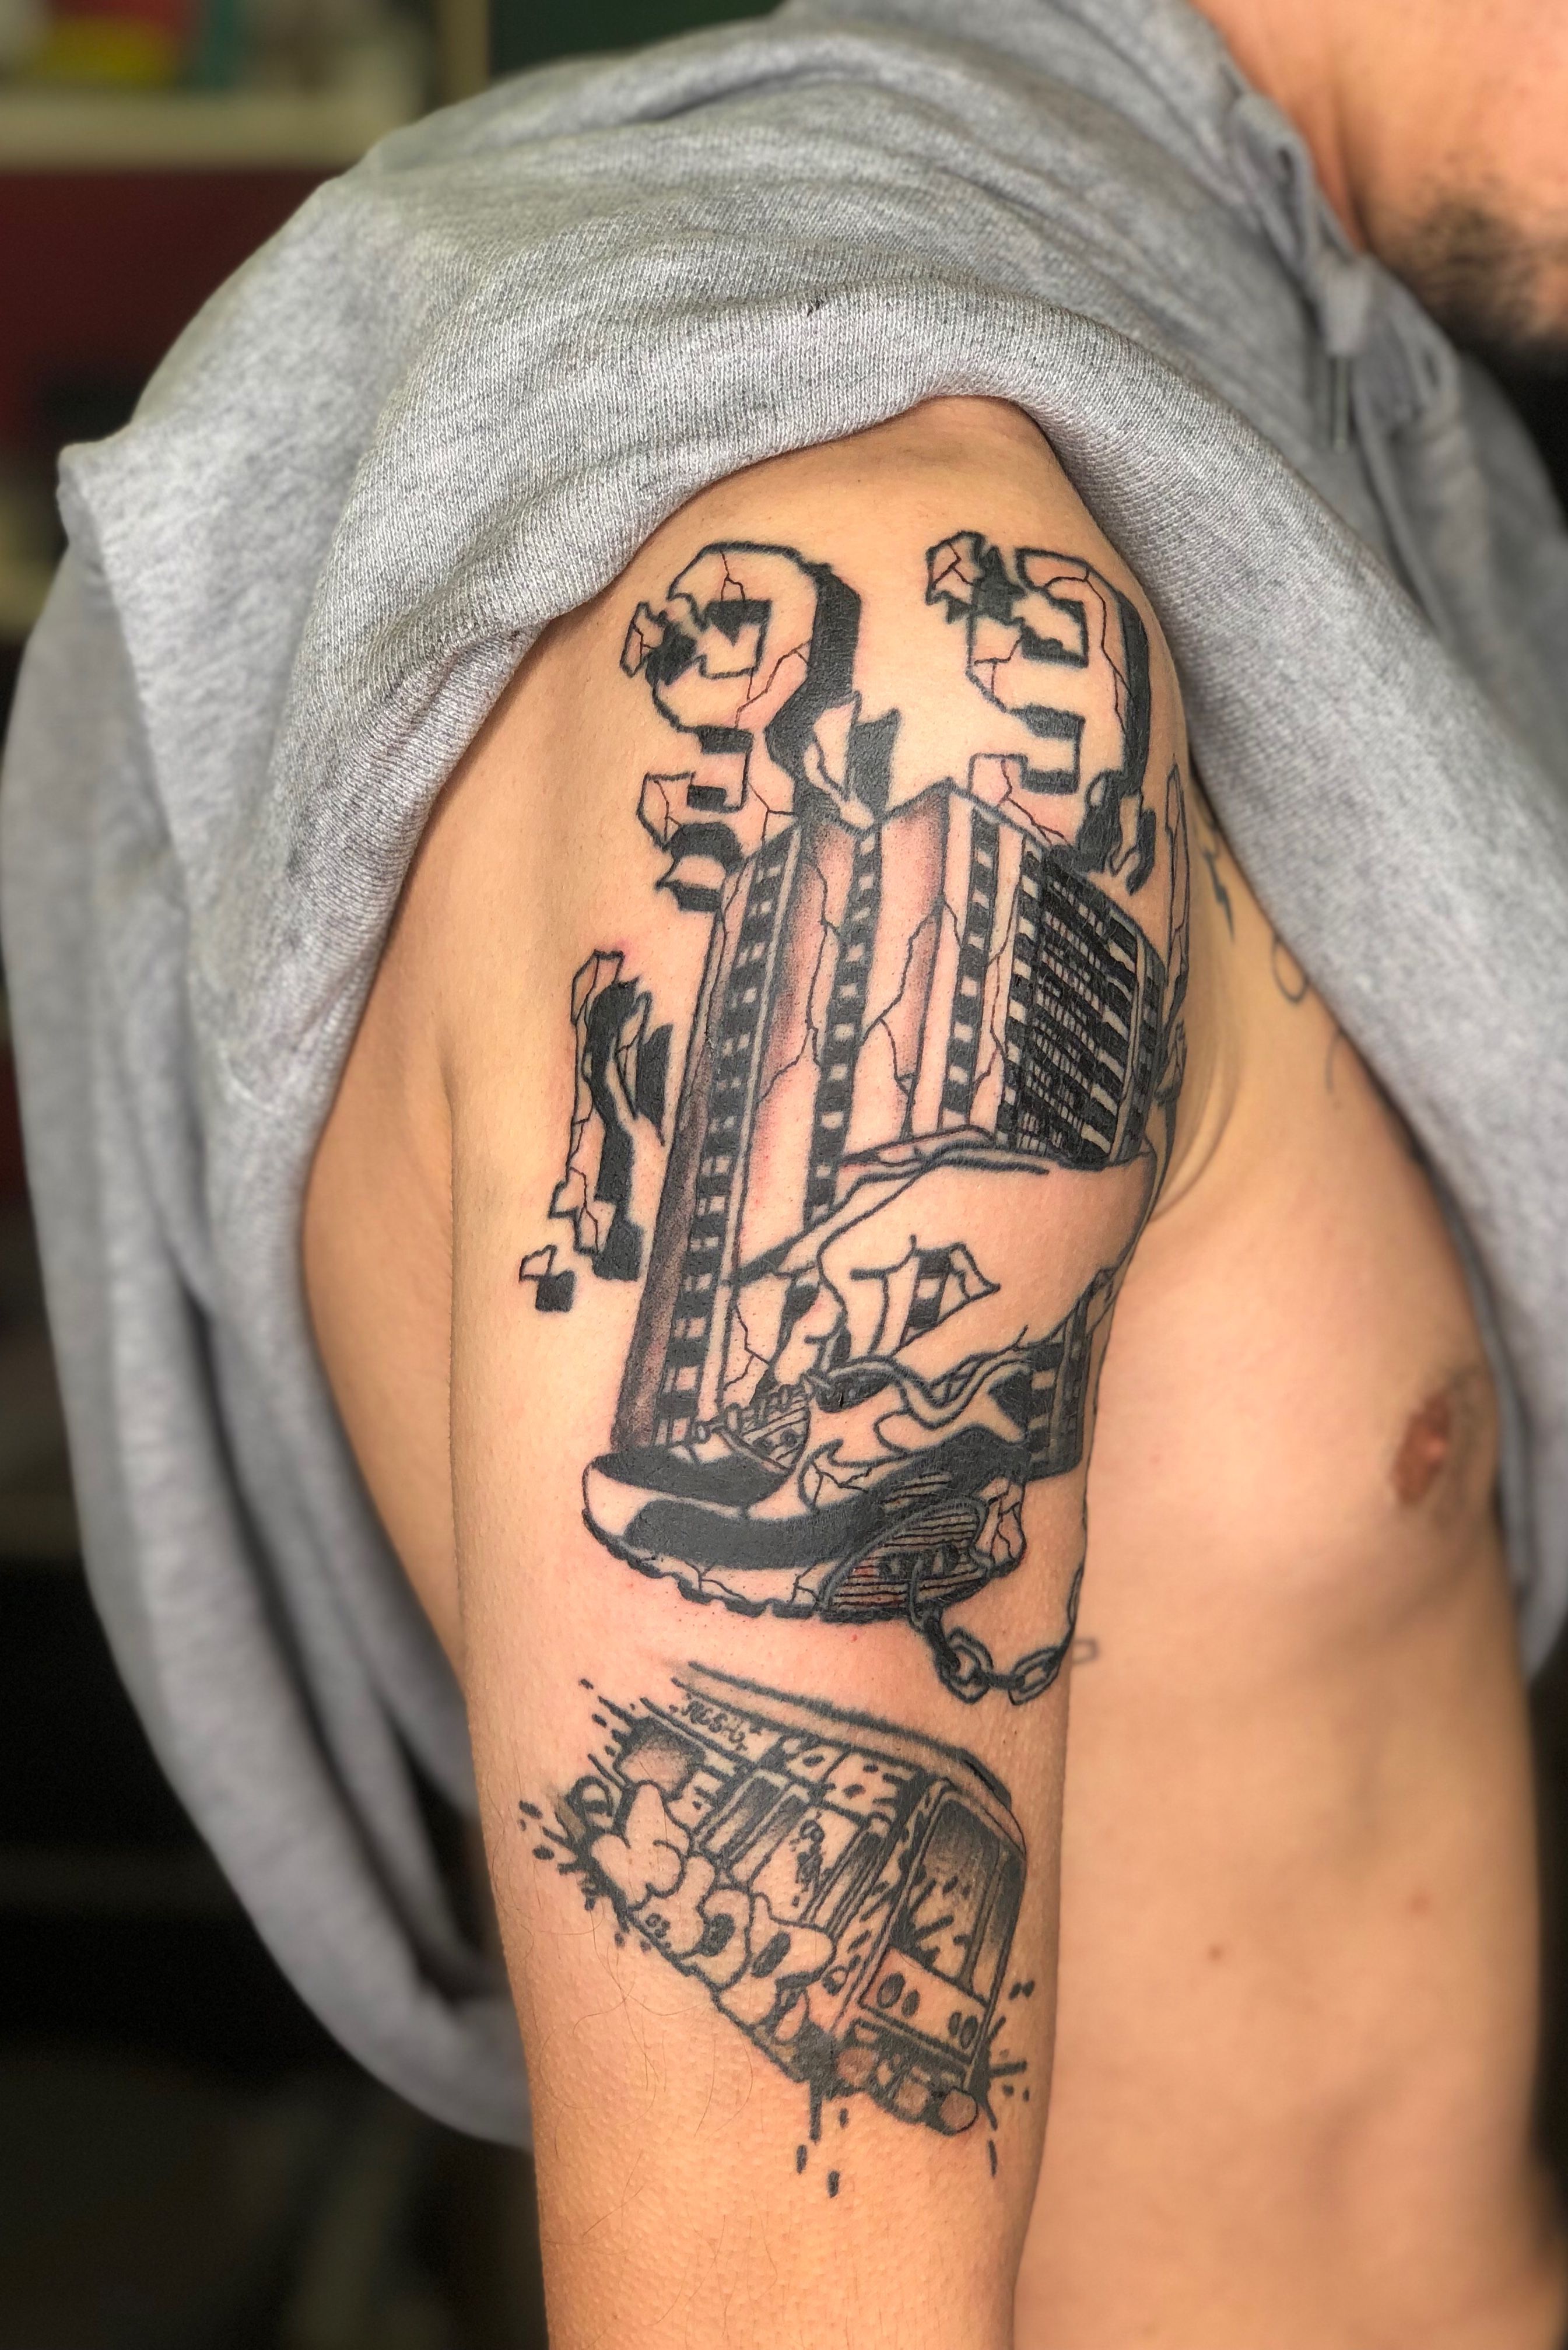 Ignorant Style  Your ideas  Done by viandebleue from  France Paris  For booking contact tattoo artist directly ist istfrance   ignoranttattoo ignorantstyle ignorantstyletattoo ignorant tatouage  francetattoo tattoofrance paristattoo 